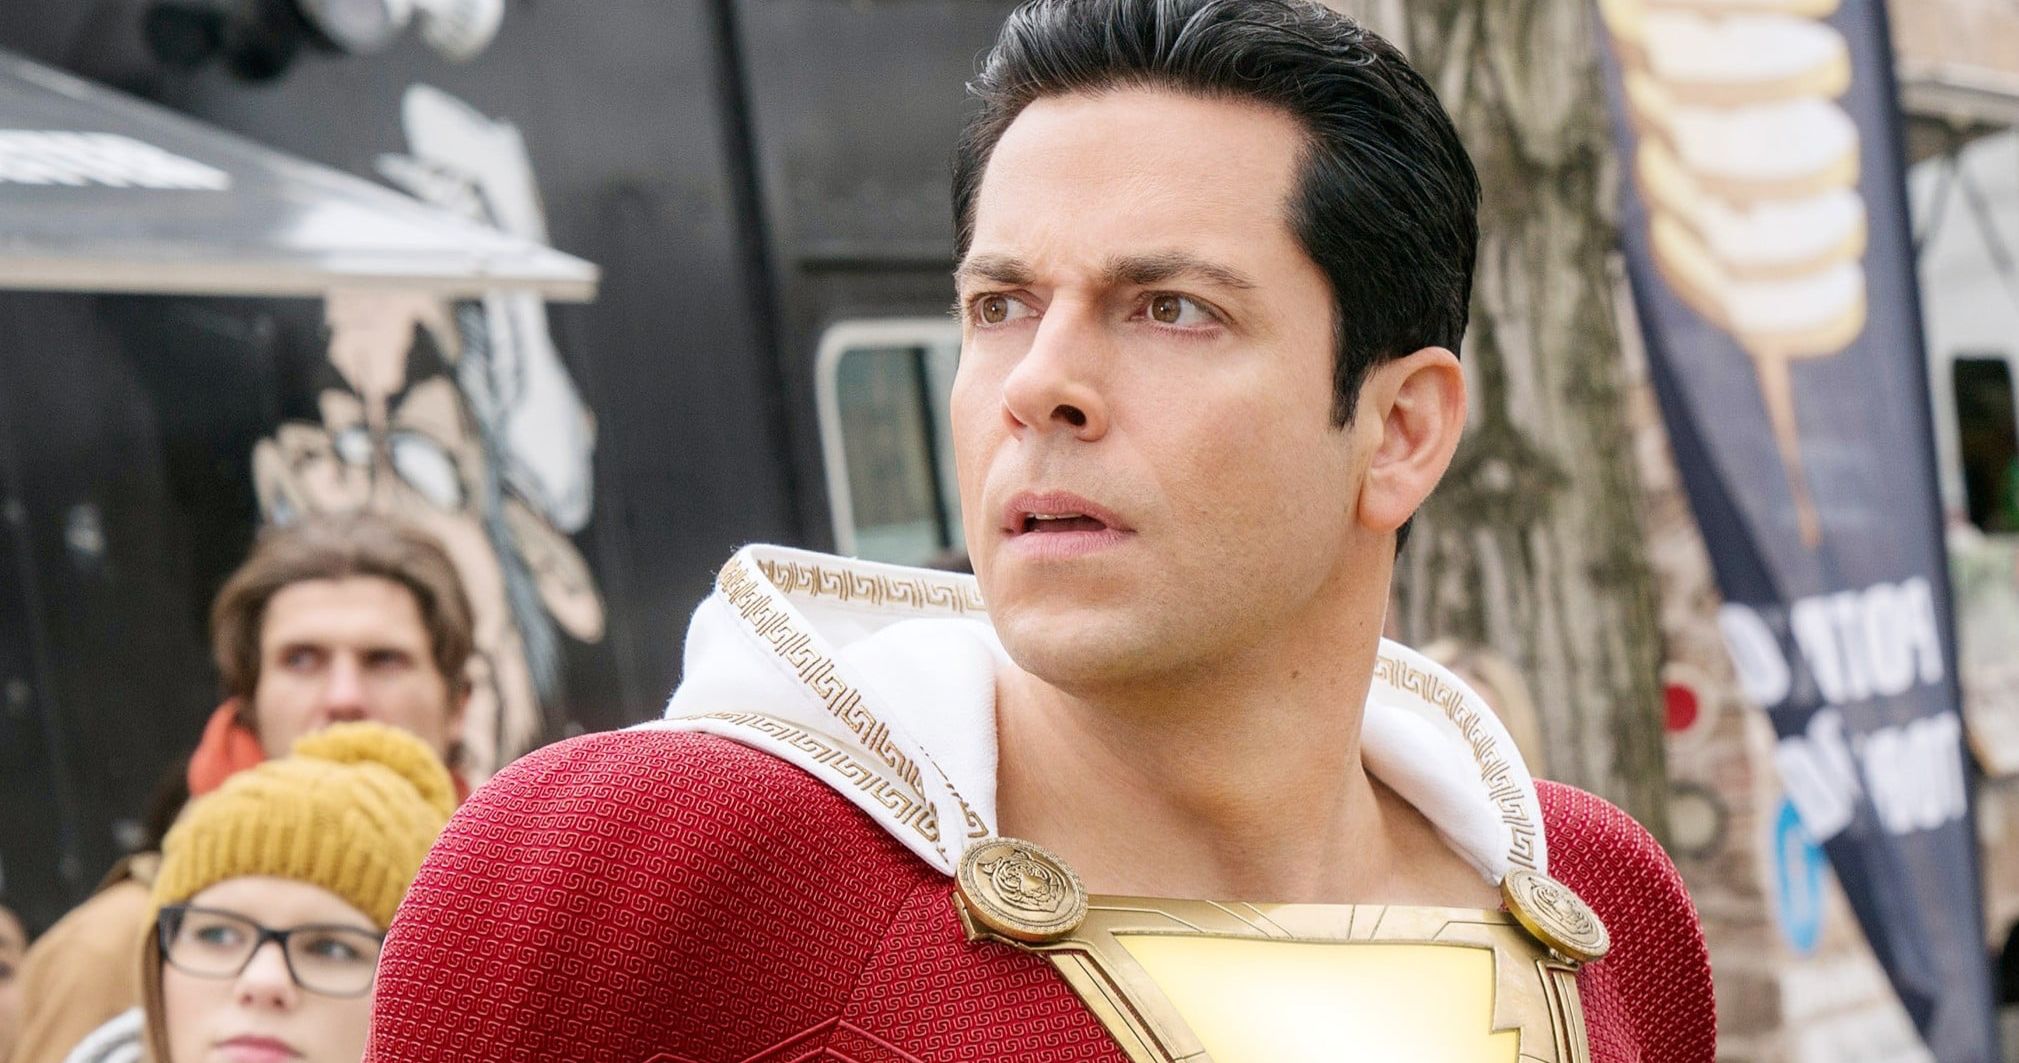 Shazam! Star Zachary Levi Opens Up About Depression, Therapy and Finding New Hope